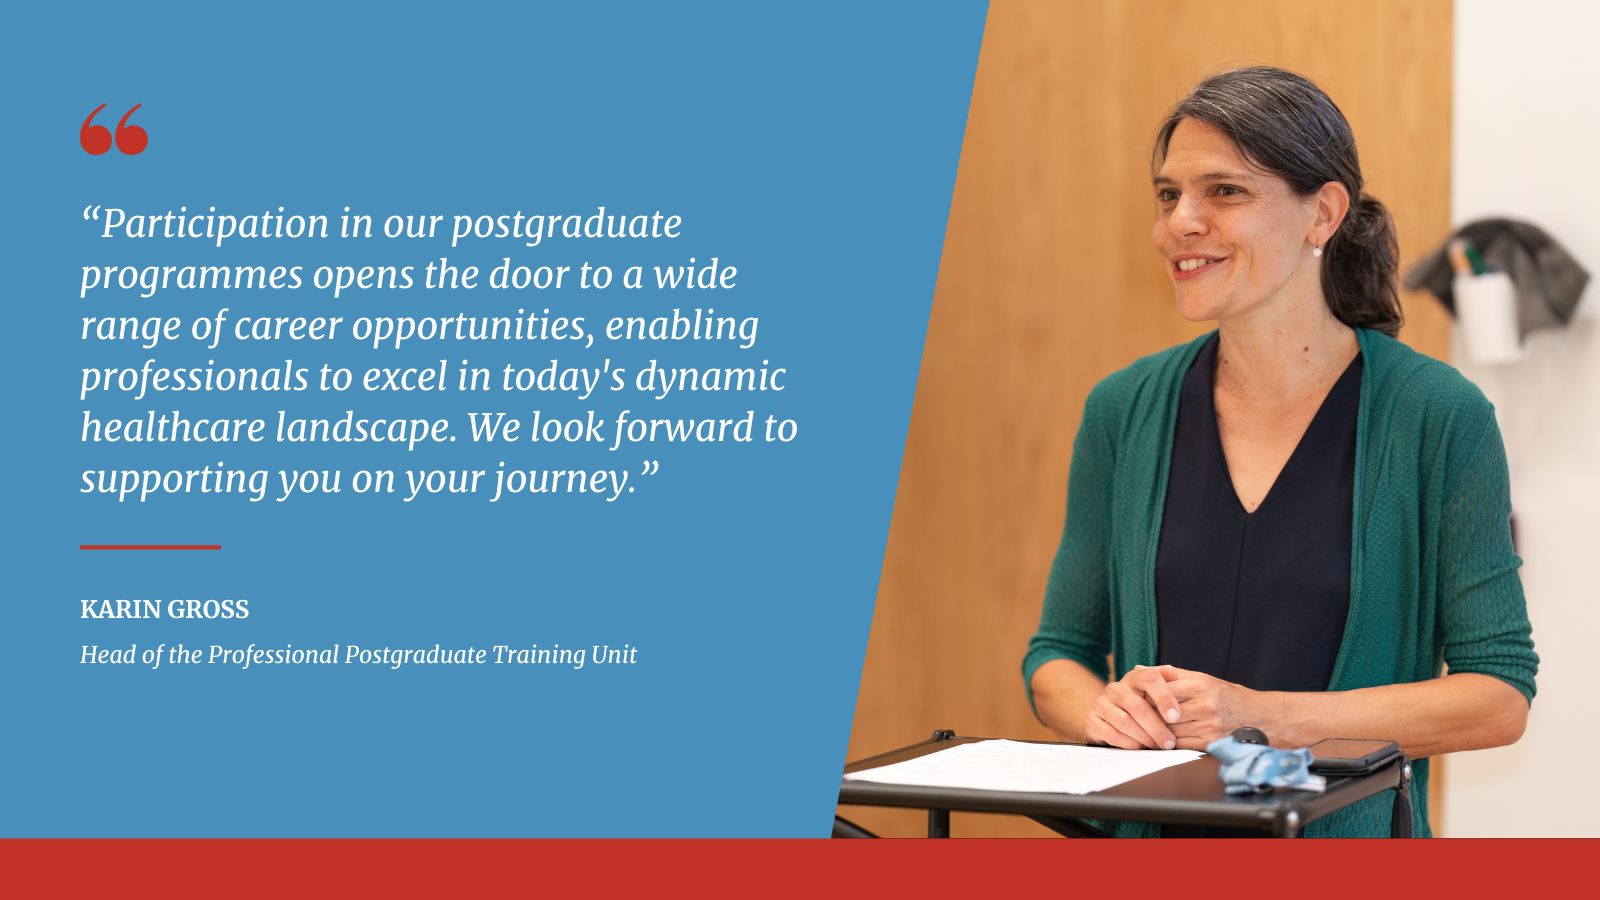 Participation in our postgraduate programmes opens the door to a wide range of career opportunities, enabling professionals to excel in today's dynamic healthcare landscape. We look forward to supporting you on your journey. (Karin Gross, Head of the Professional Postgraduate Training Unit)